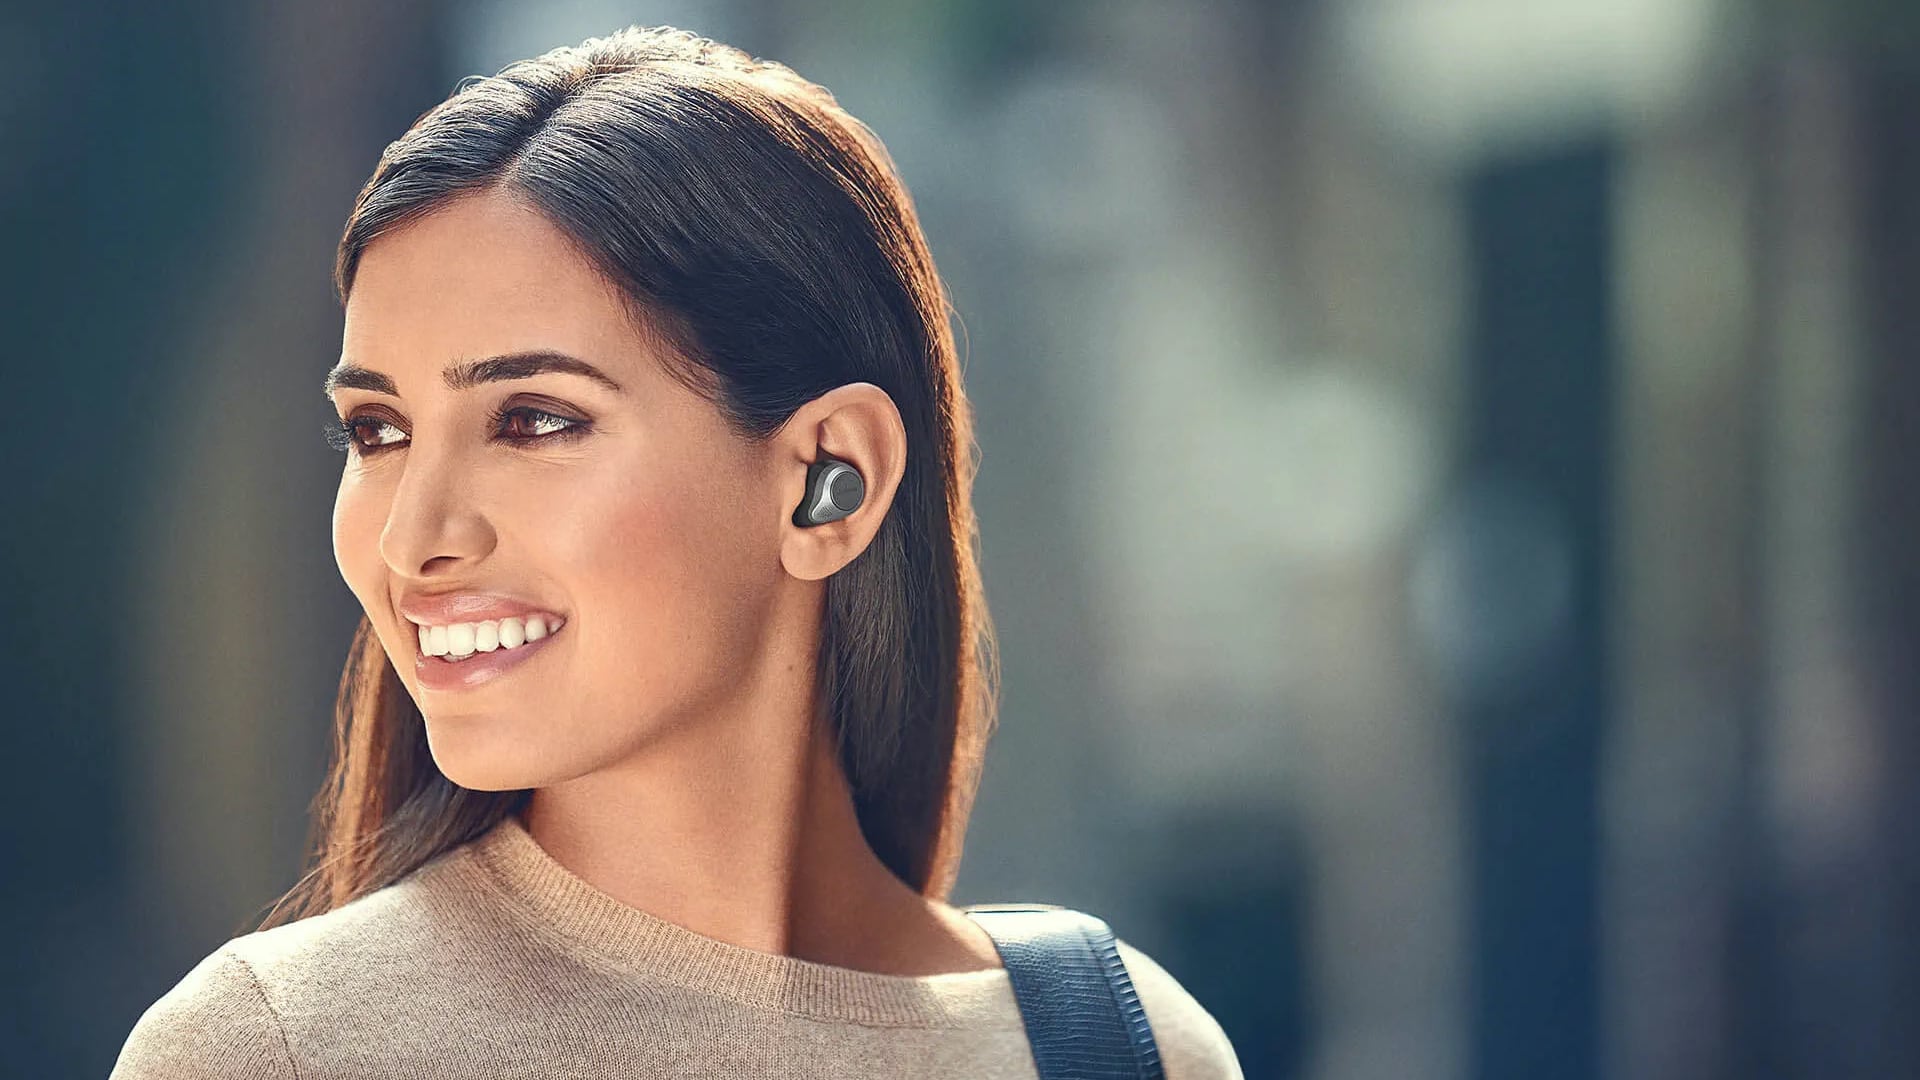 Jabra Elite 85T wireless earbuds with advanced ANC launched: Details here